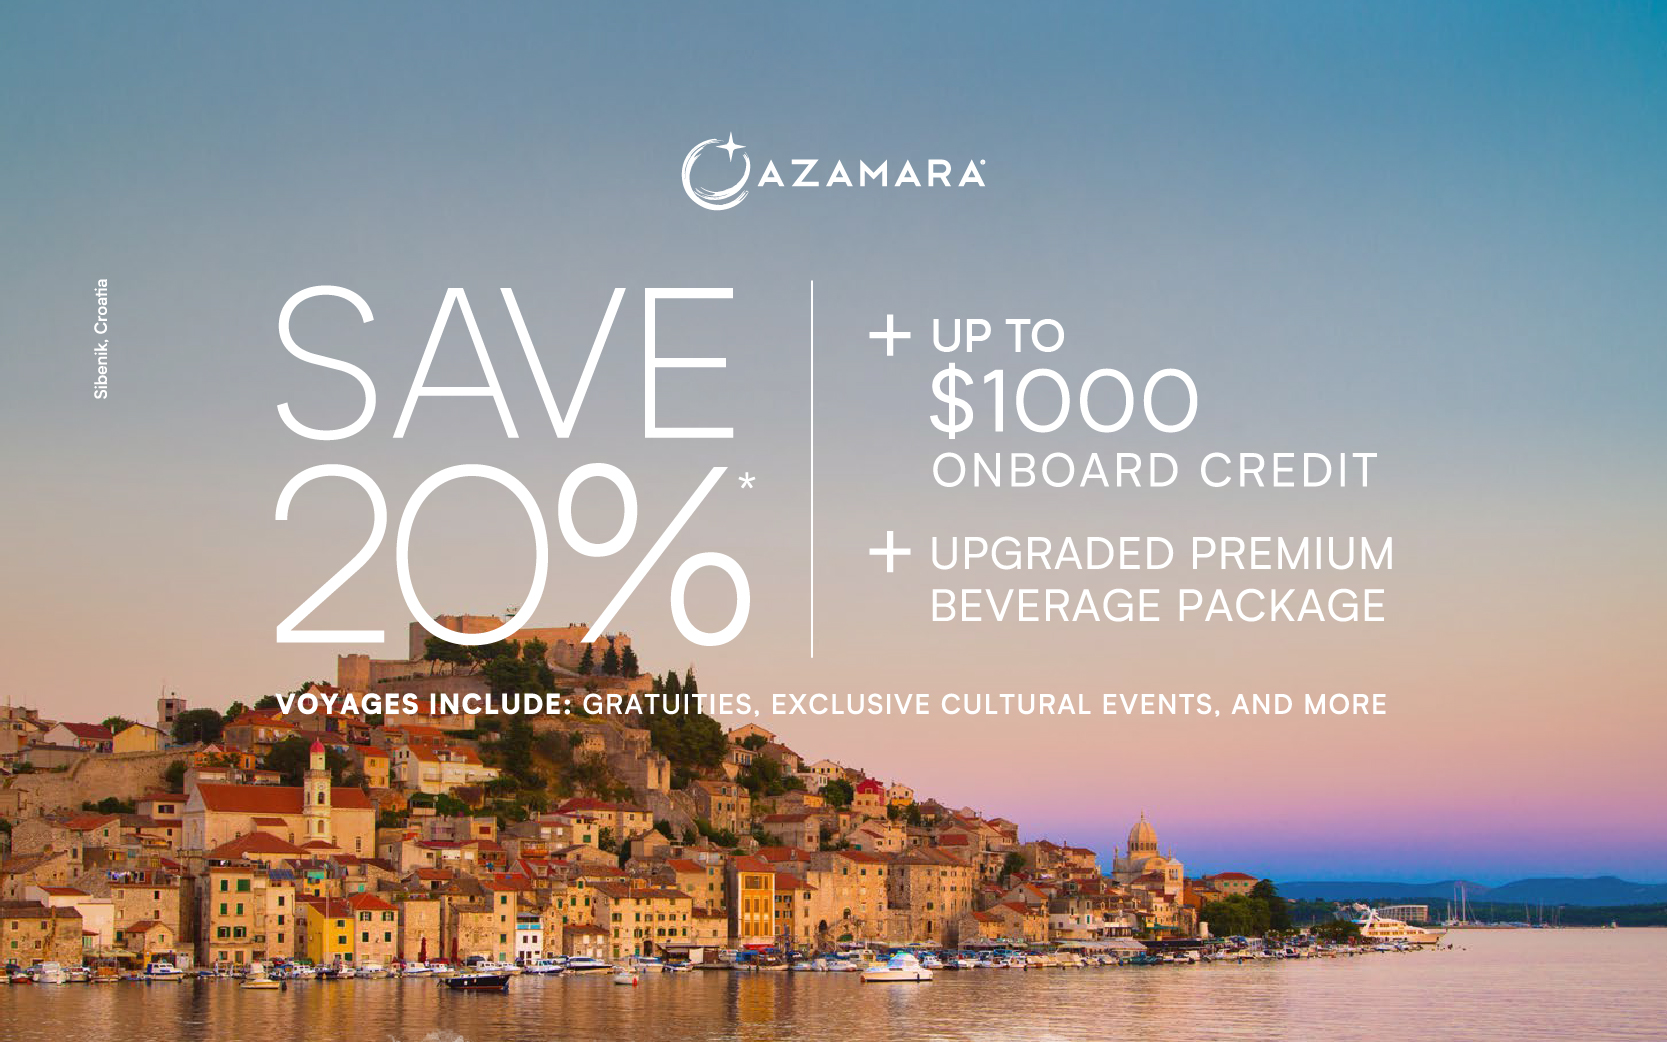 Sail with Azamara and save 20% off, plus up to $1,000 On Board Credit, plus upgraded Premium Beverage Package, and more!